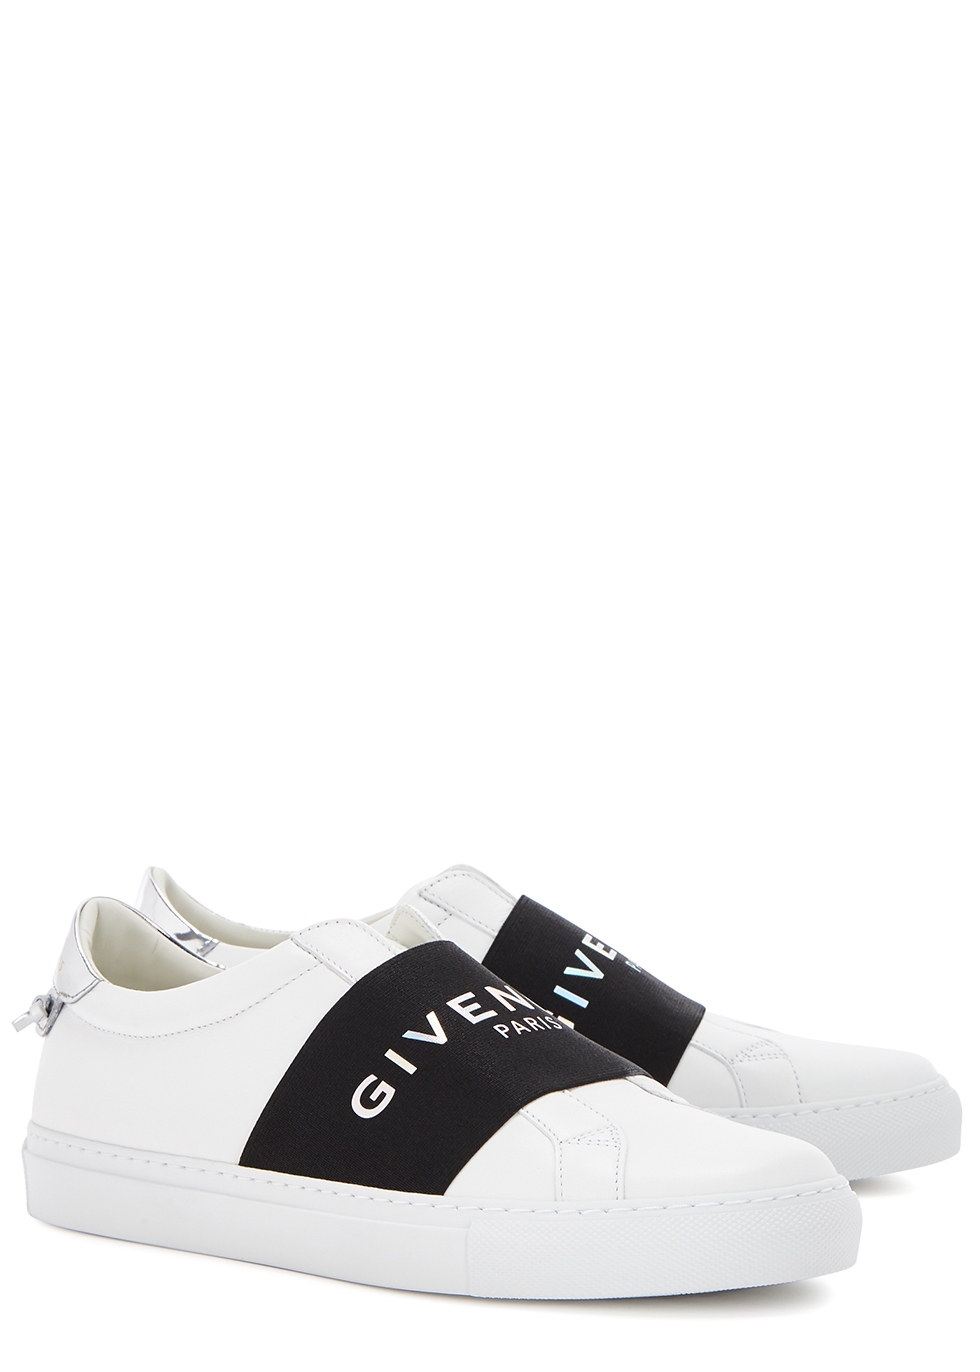 givenchy men's urban street leather sneakers